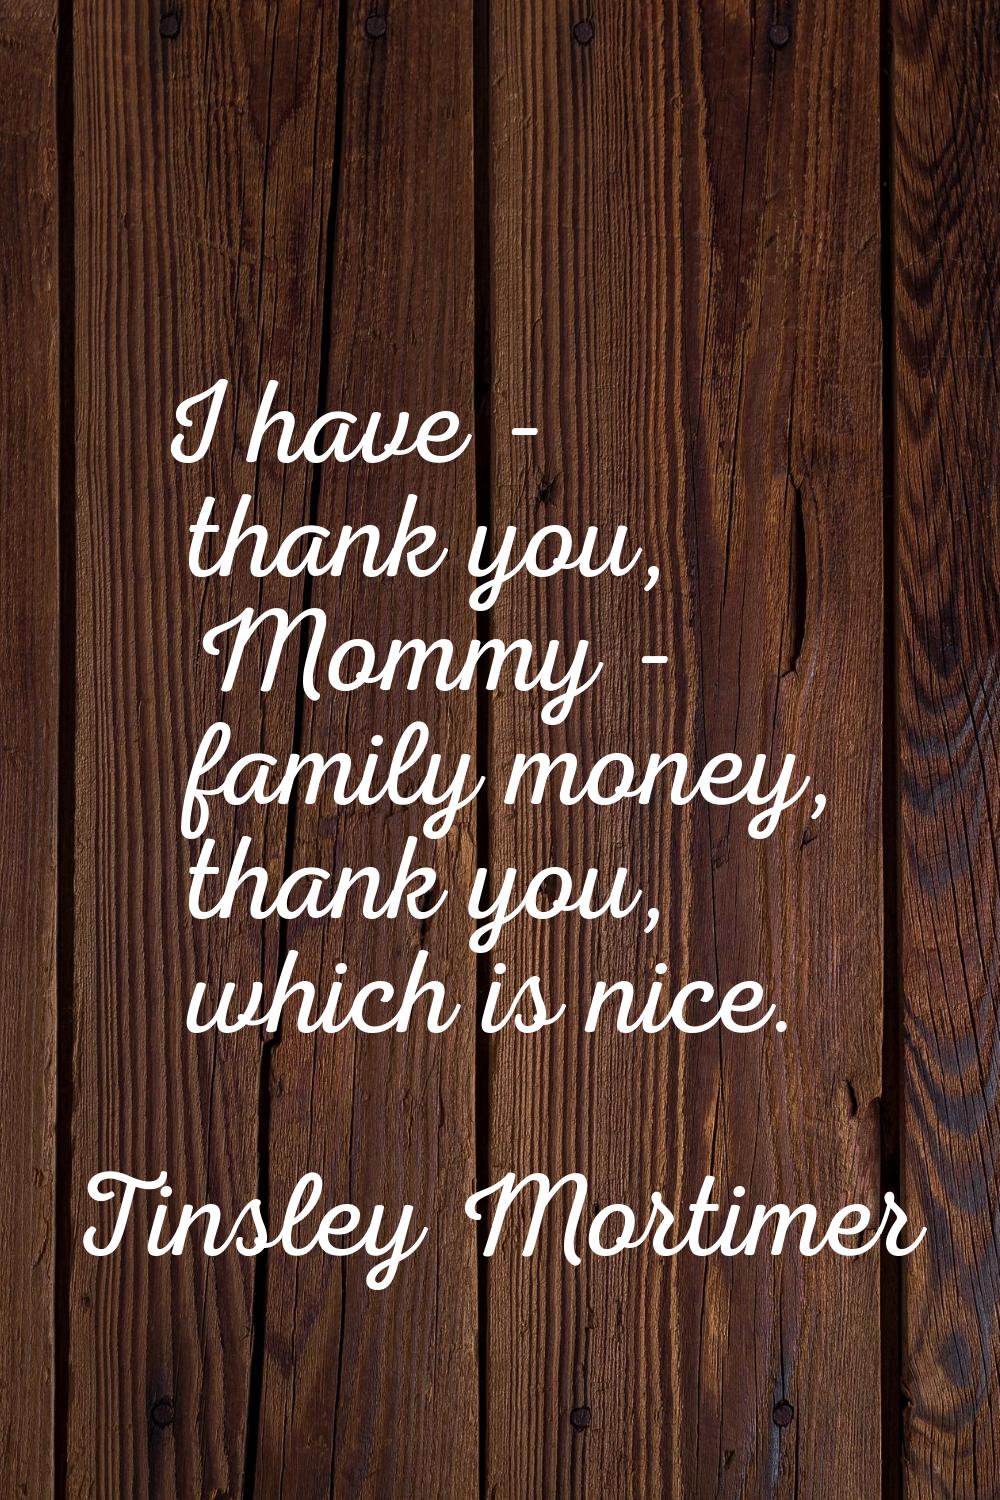 I have - thank you, Mommy - family money, thank you, which is nice.